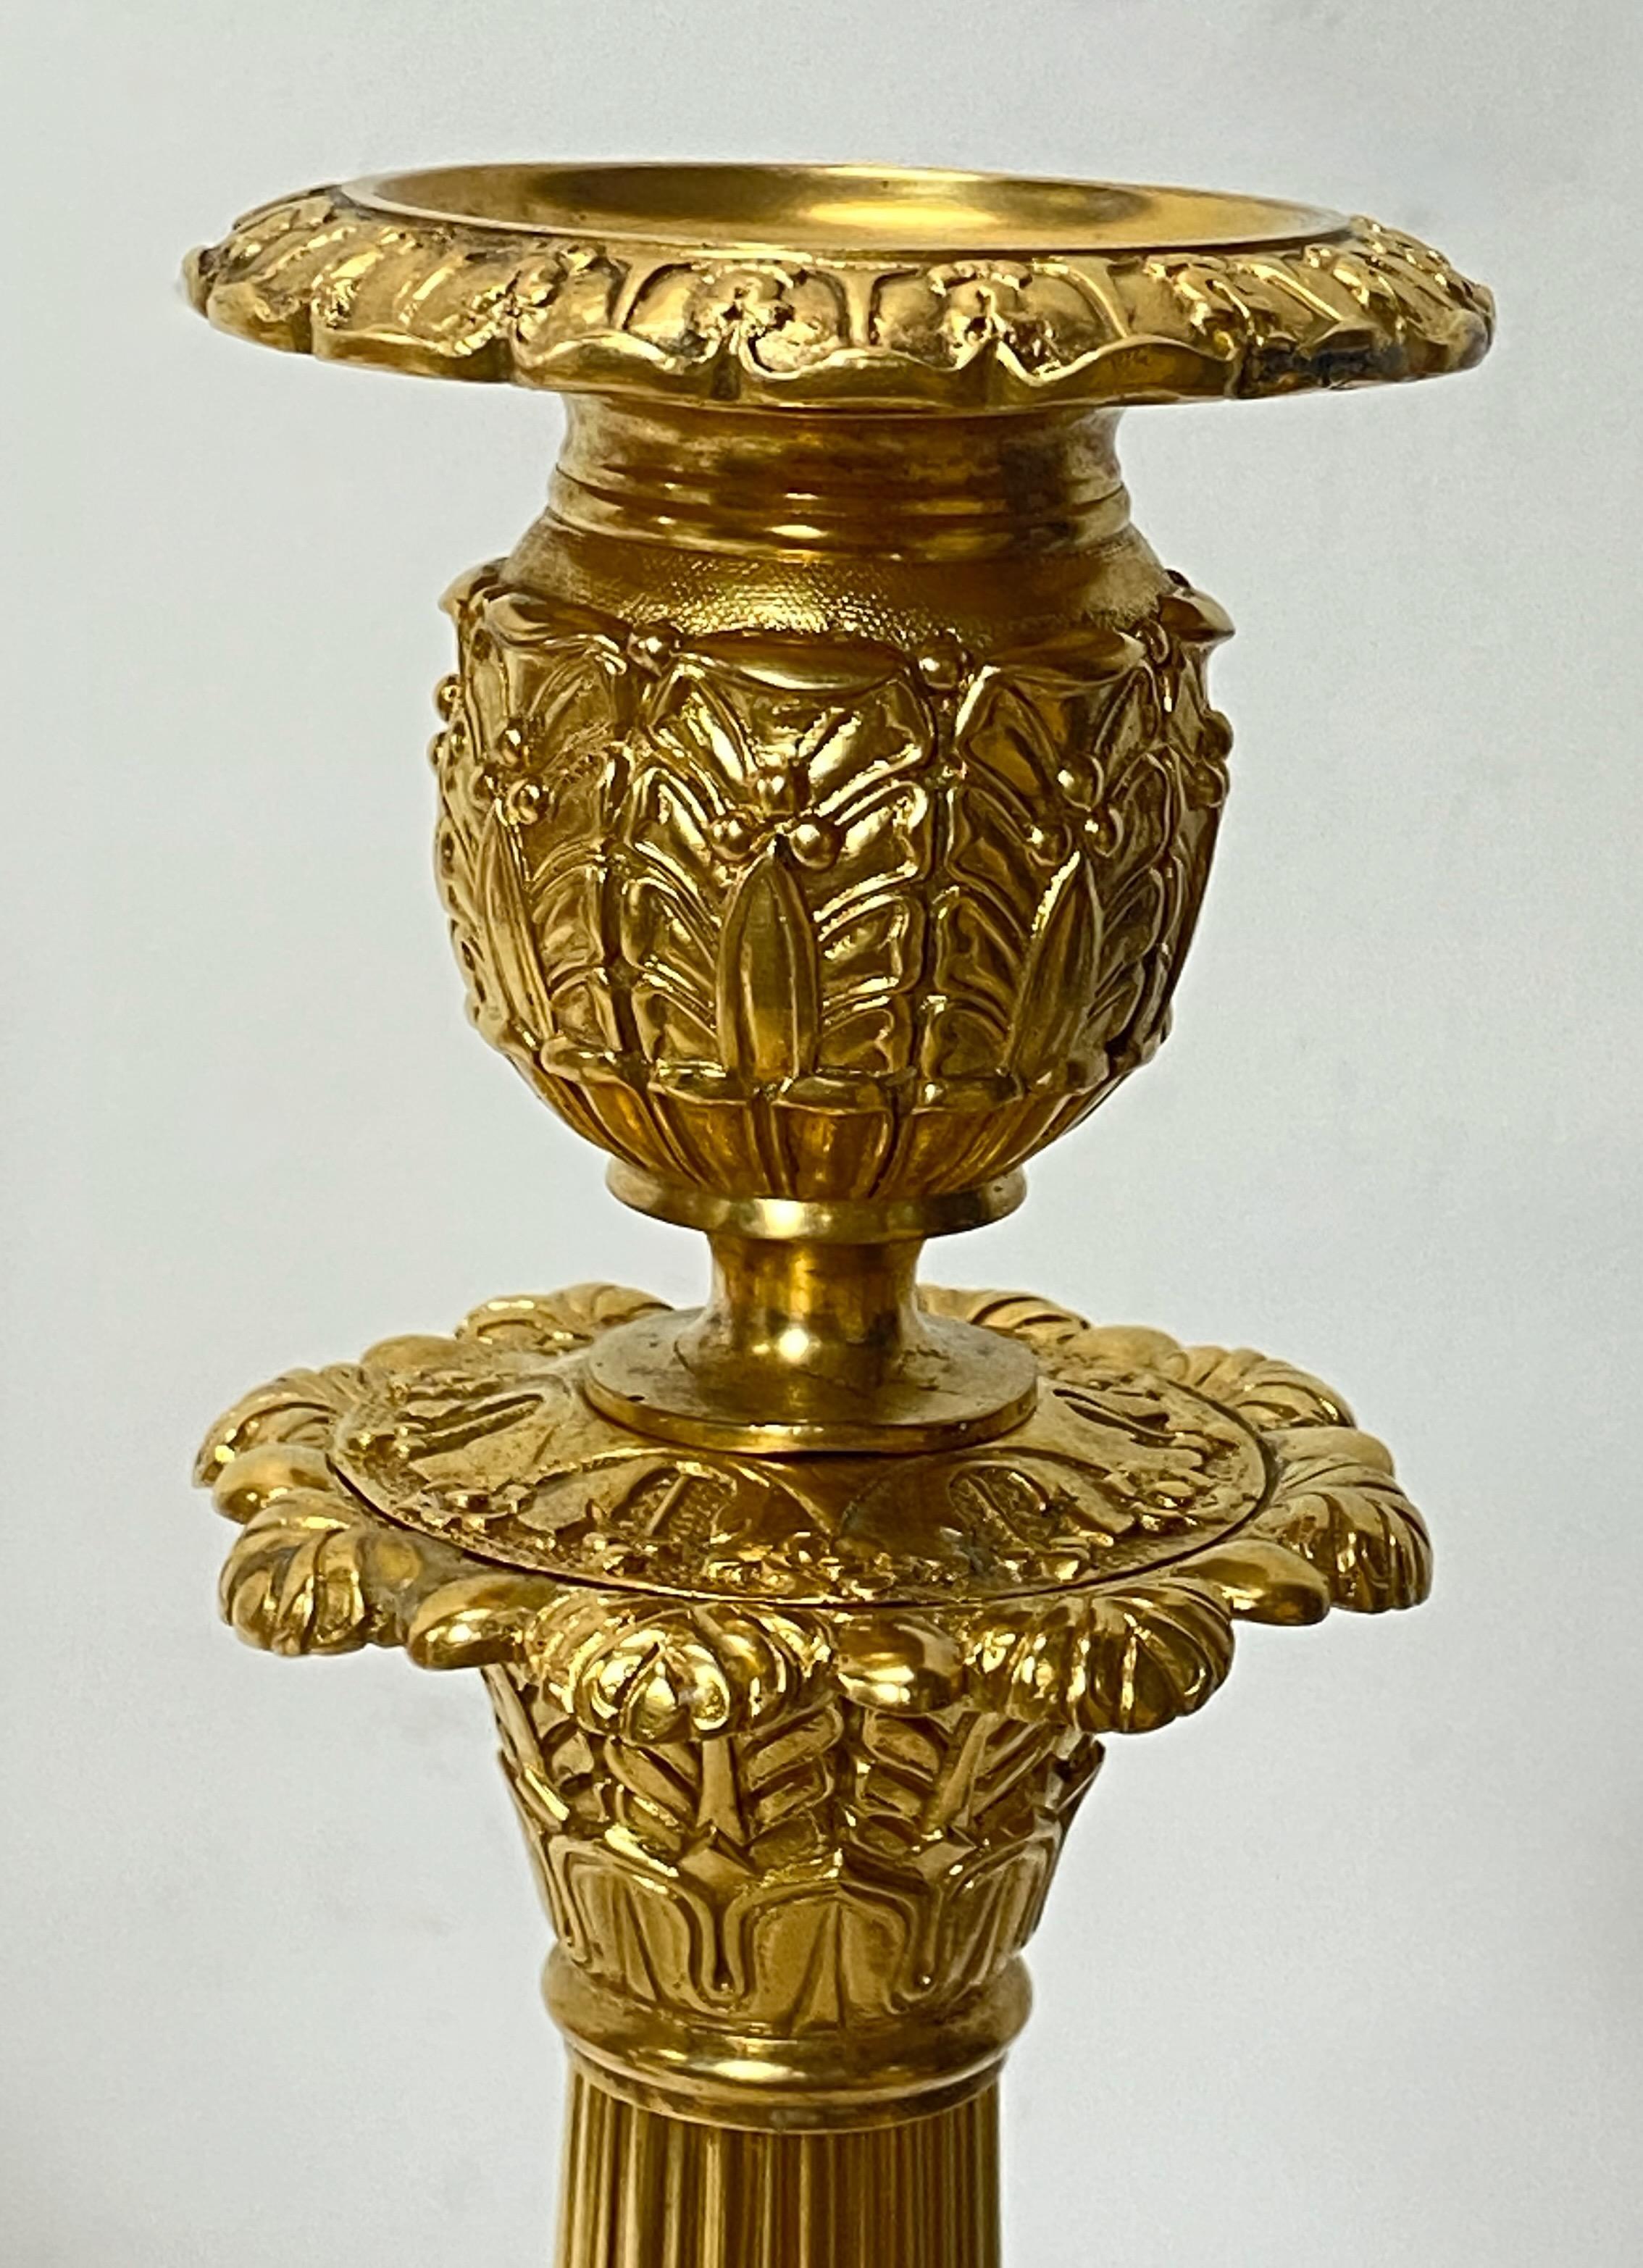 Pair of Early to Mid-19th Century French Empire Gilt Bronze Candlesticks For Sale 3